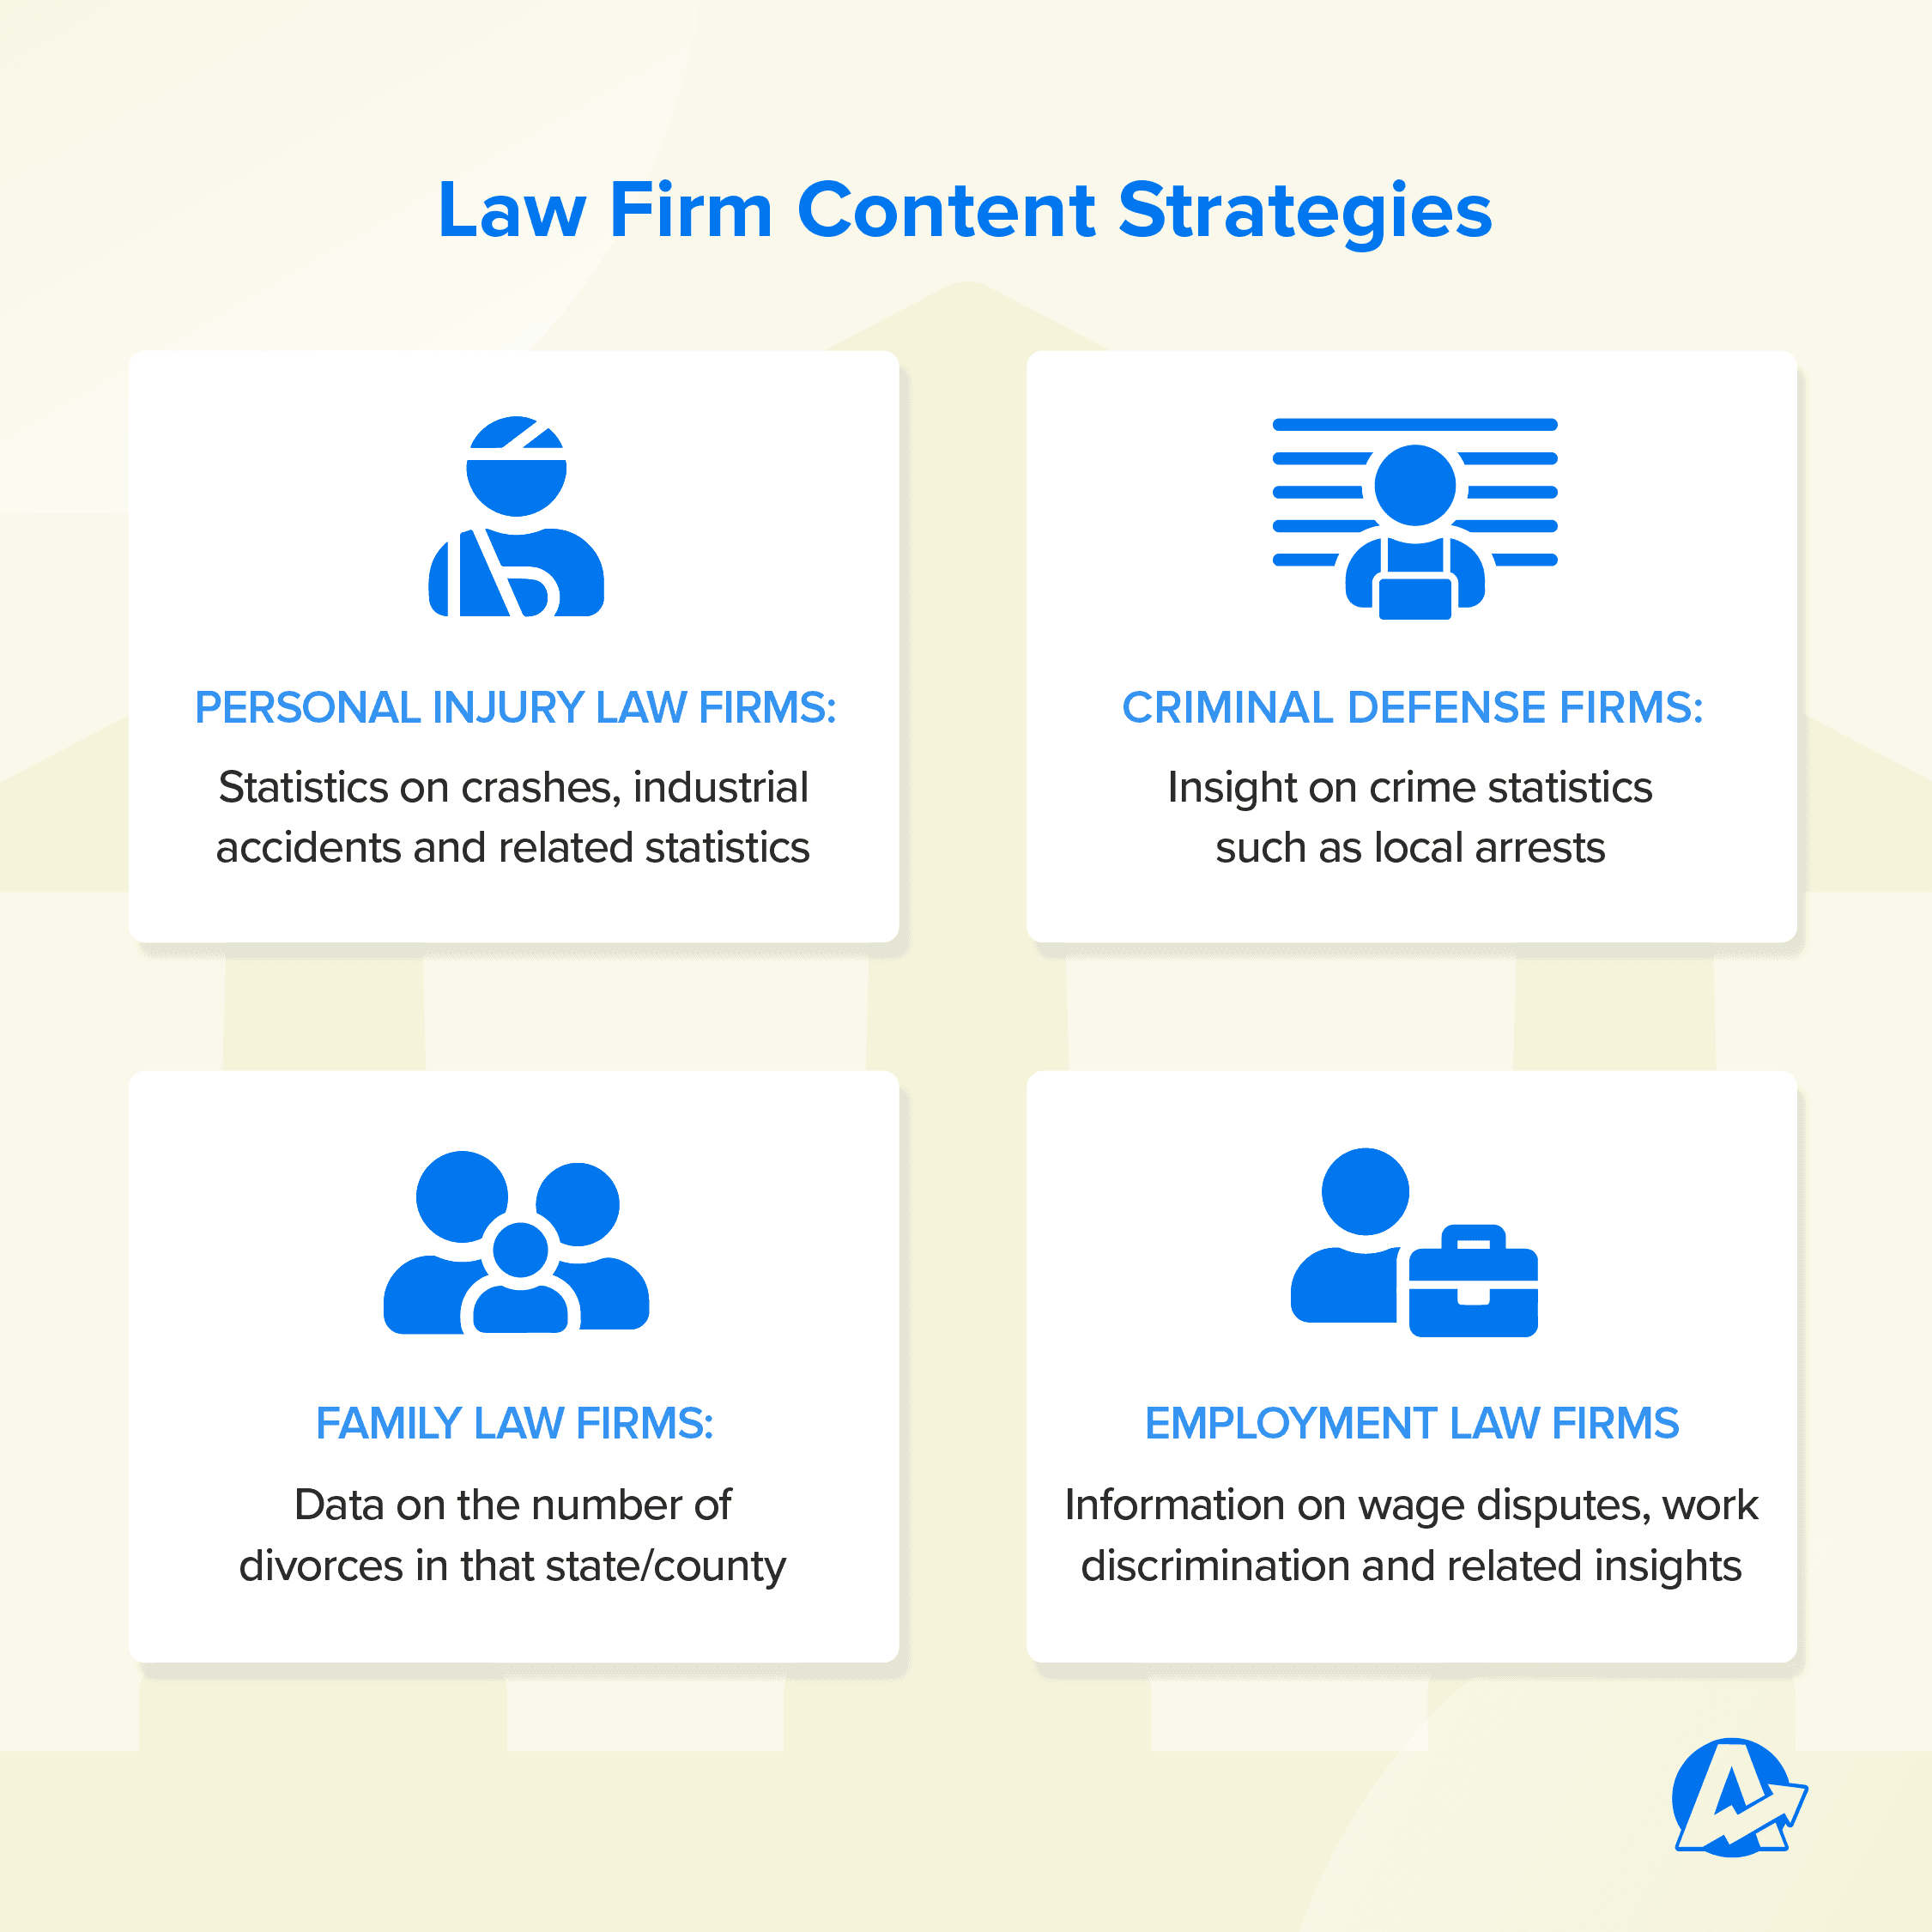 content strategies for law firm seo by type of firm